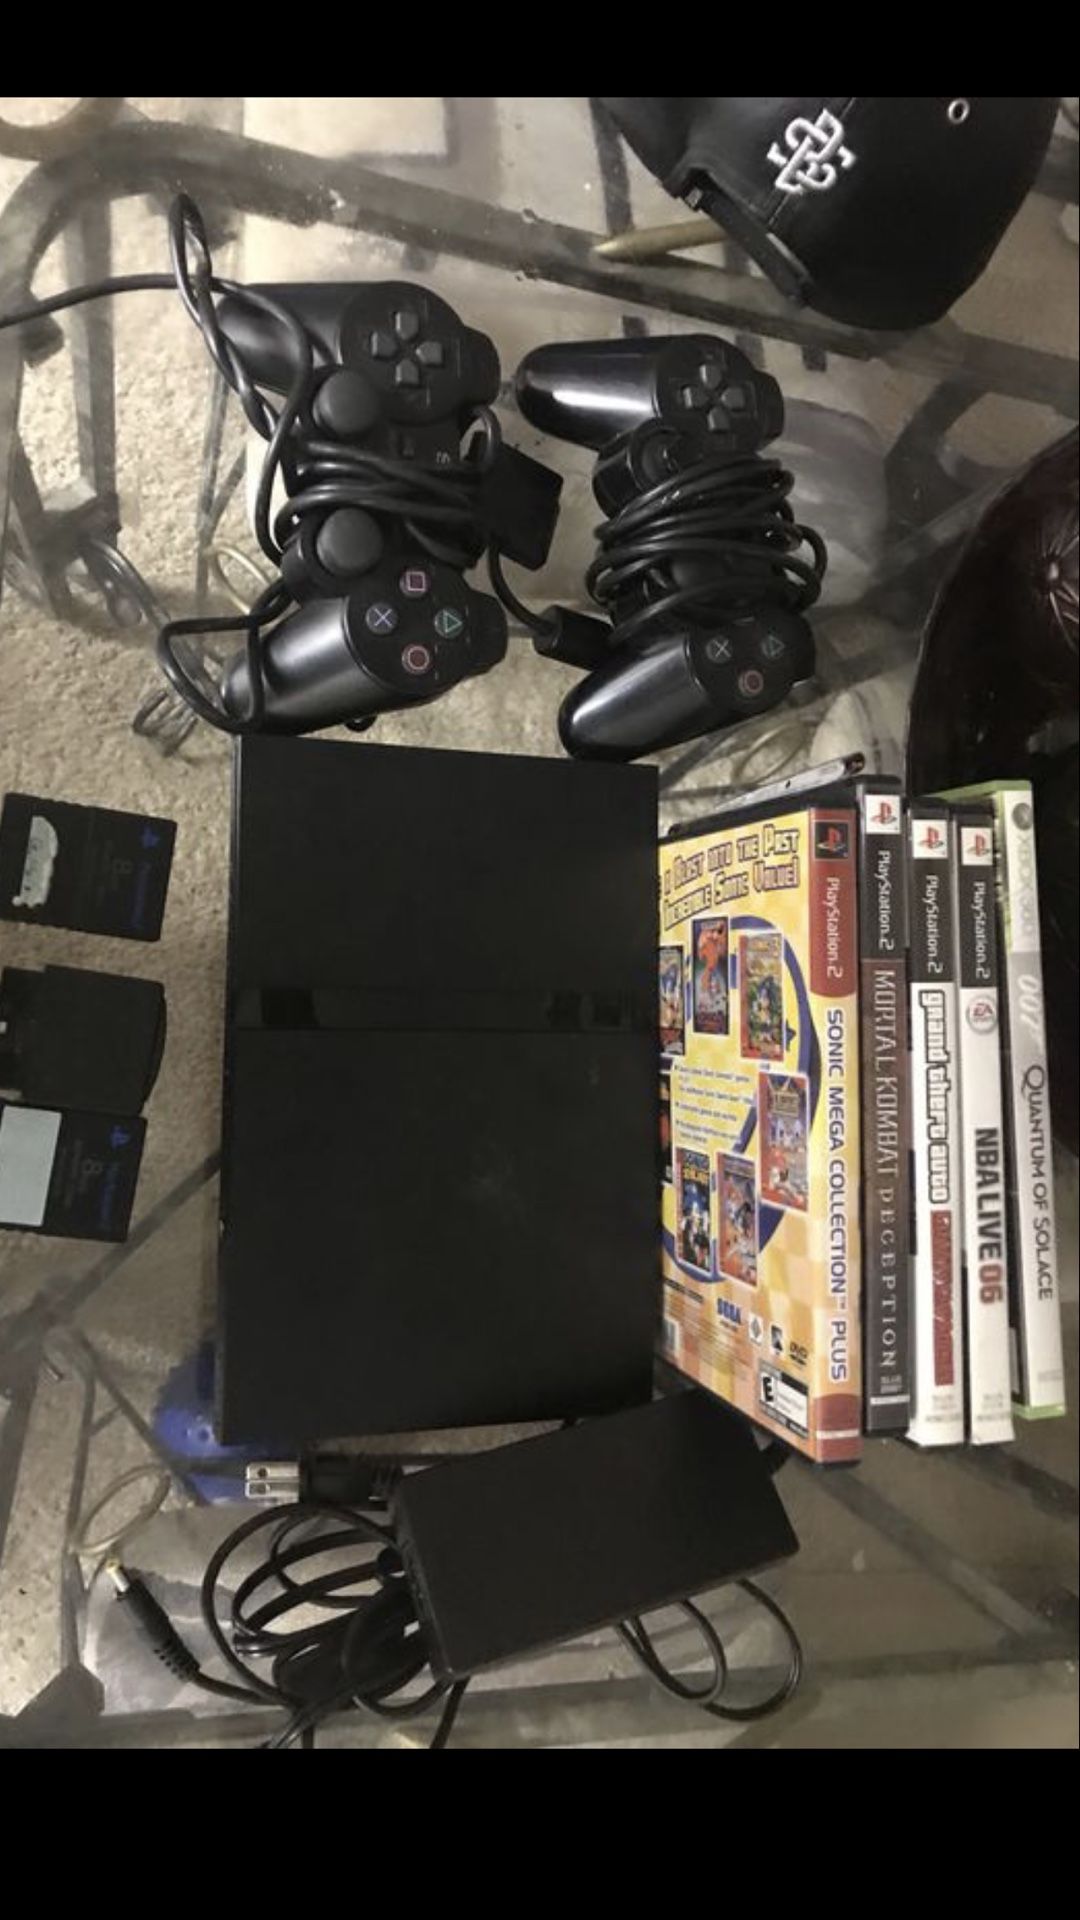 ps2 w/games...and 2-way baby monitor